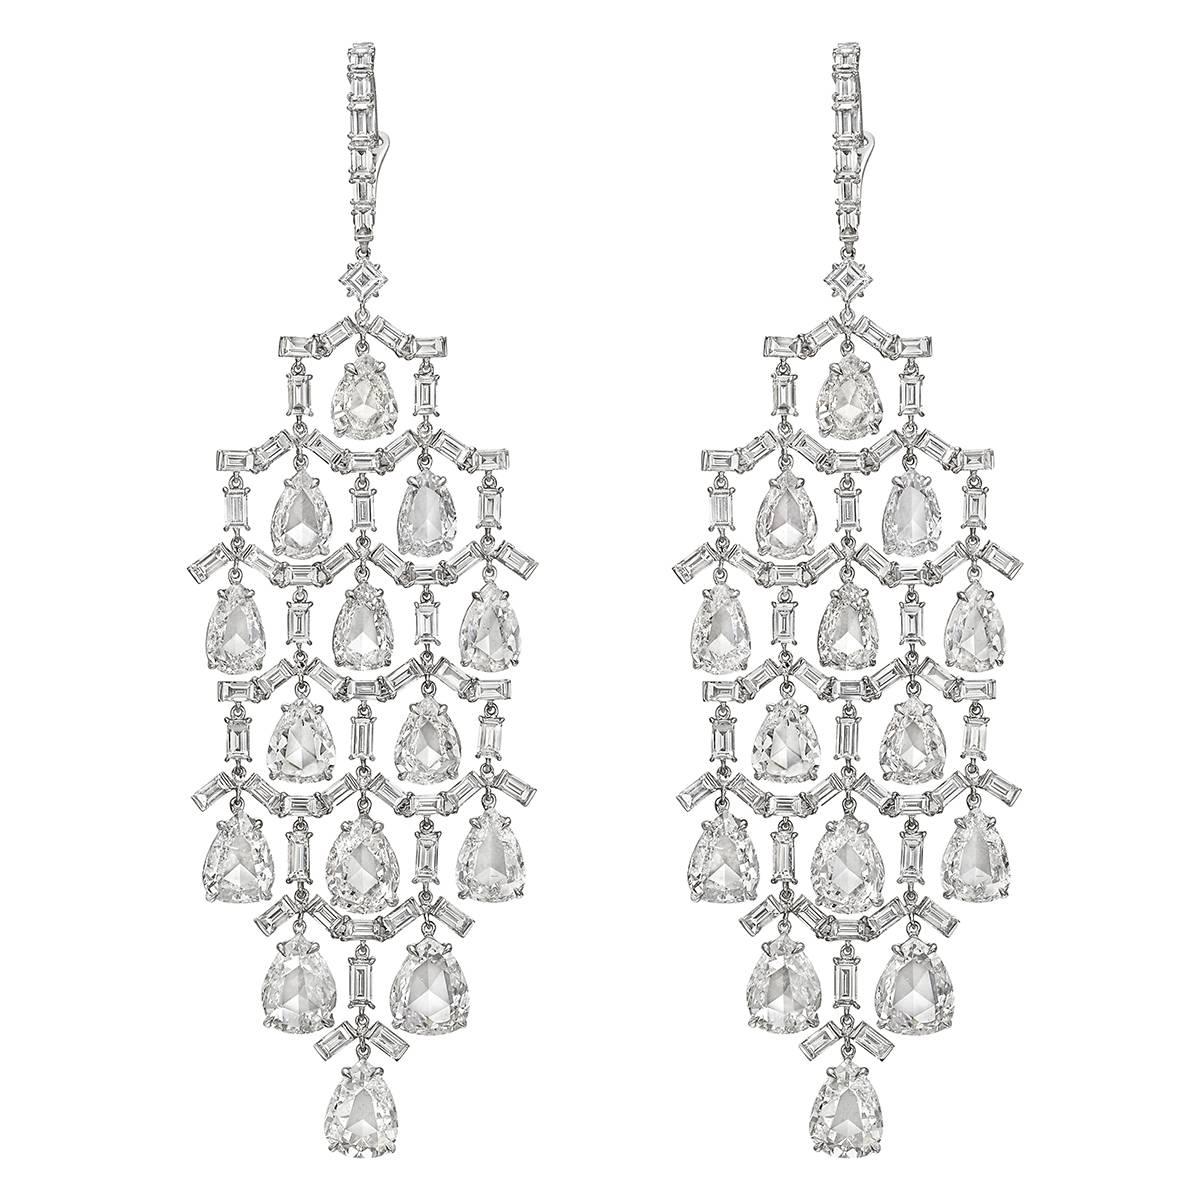 Long chandelier earrings, featuring an elegant lattice of baguette-cut diamonds suspending pear-shaped diamond drops, in platinum. Diamonds weighing 14.13 total carats. Platinum wires with hinged enclosures. 3.14